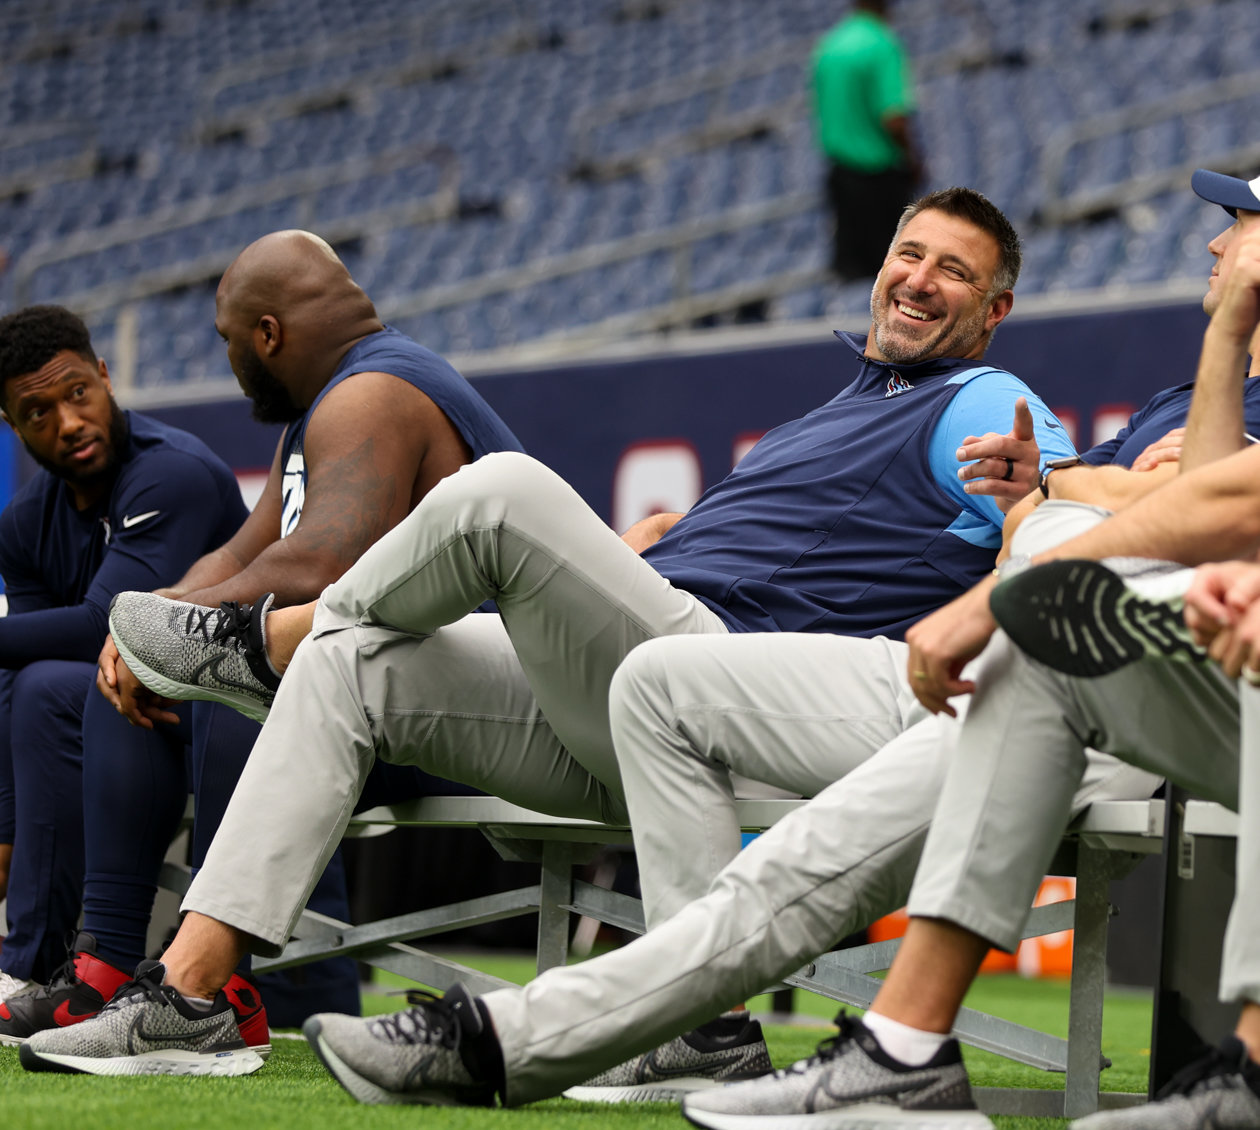 Titans head coach Mike Vrabel before the start of an NFL game between the Texans and the Titans on Oct. 30, 2022 in Houston.